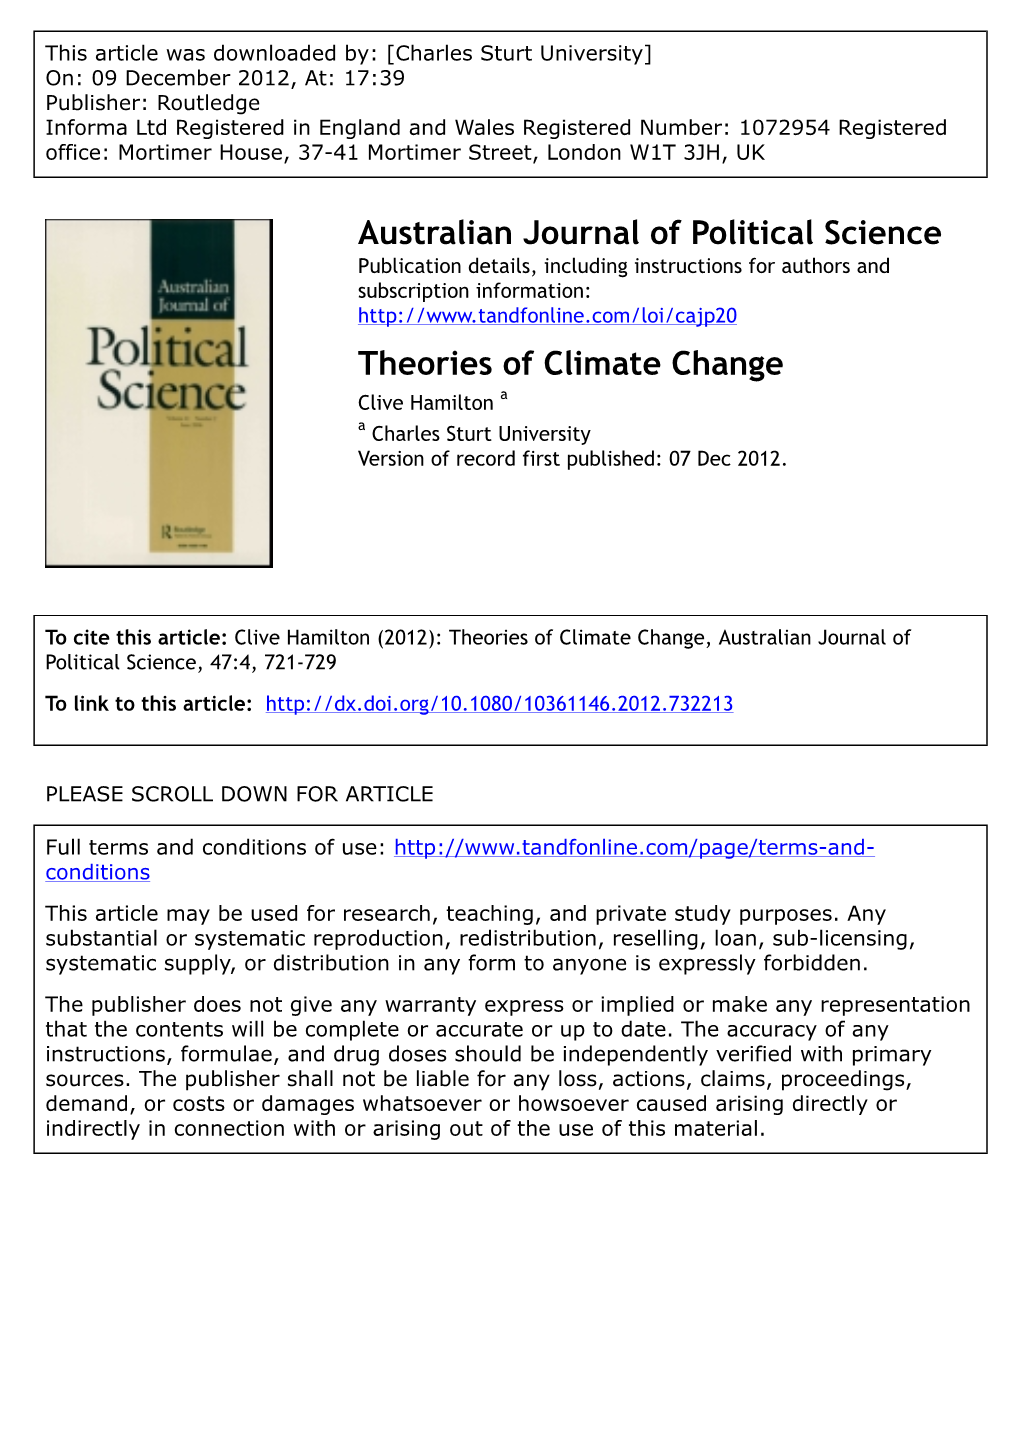 Theories of Climate Change Clive Hamilton a a Charles Sturt University Version of Record First Published: 07 Dec 2012